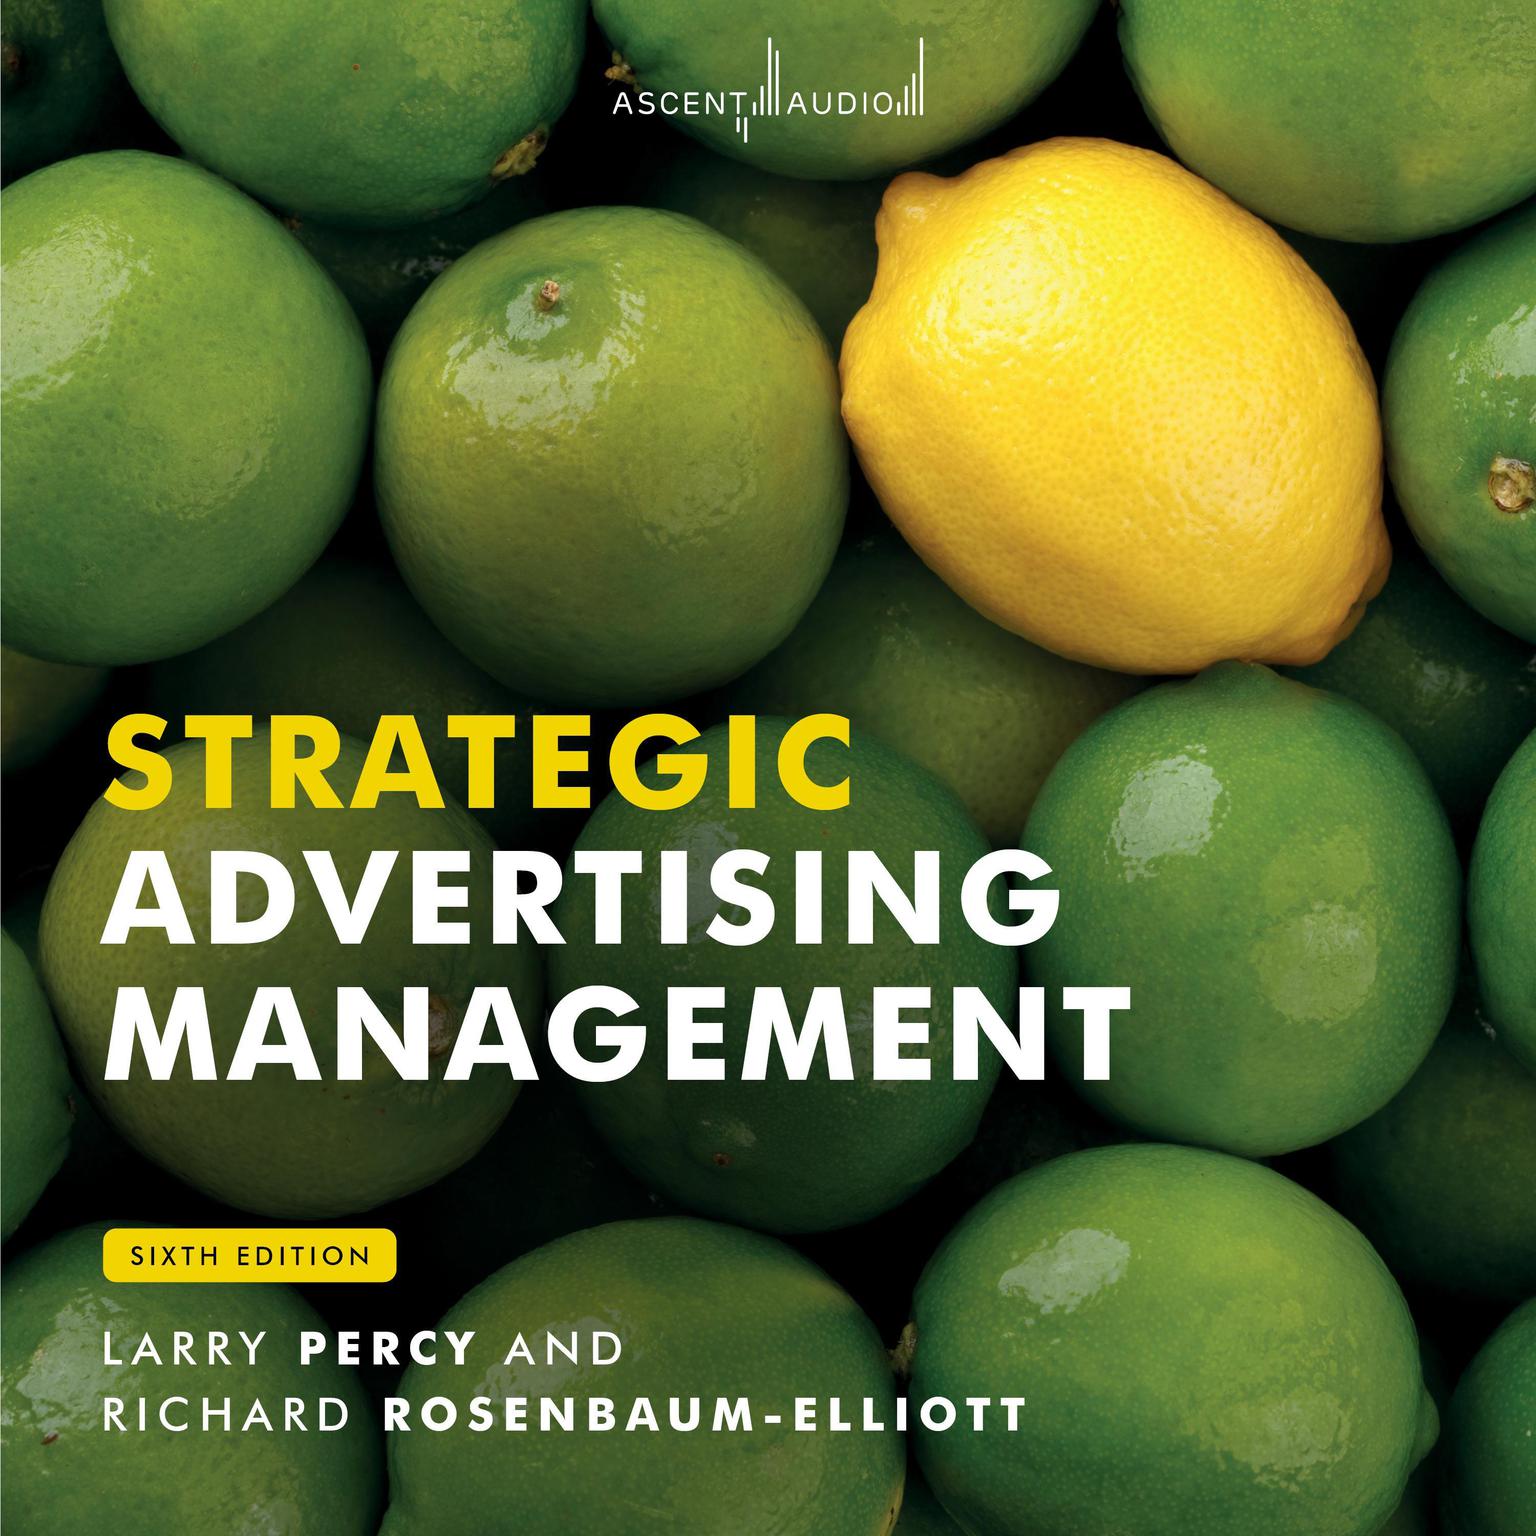 Strategic Advertising Management: 6th Edition Audiobook, by Larry Percy